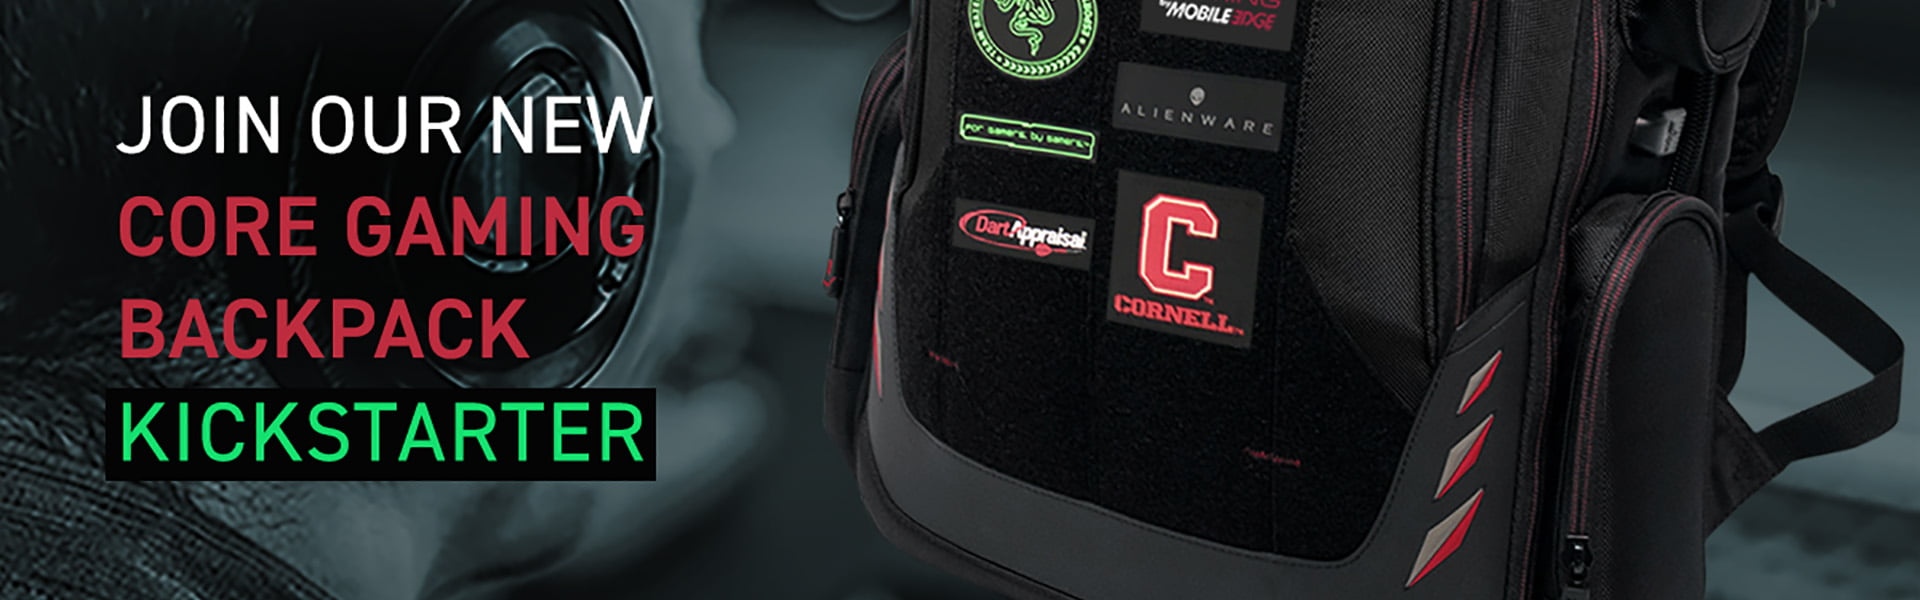 ‘CORE’ Gaming Backpack the Ultimate Gift for Gamers 18